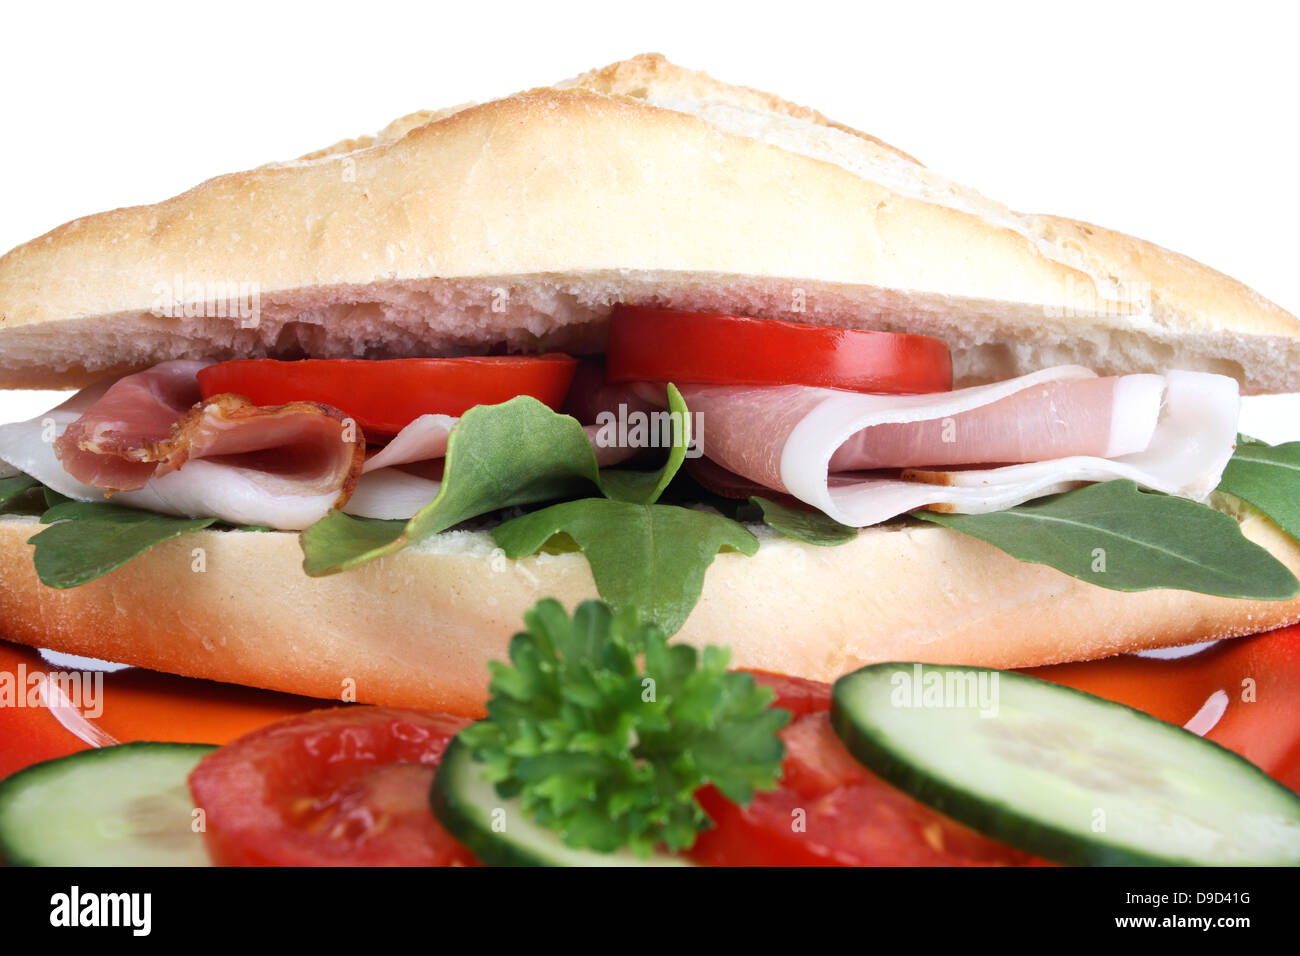 Sandwich with ham on a plate Stock Photo